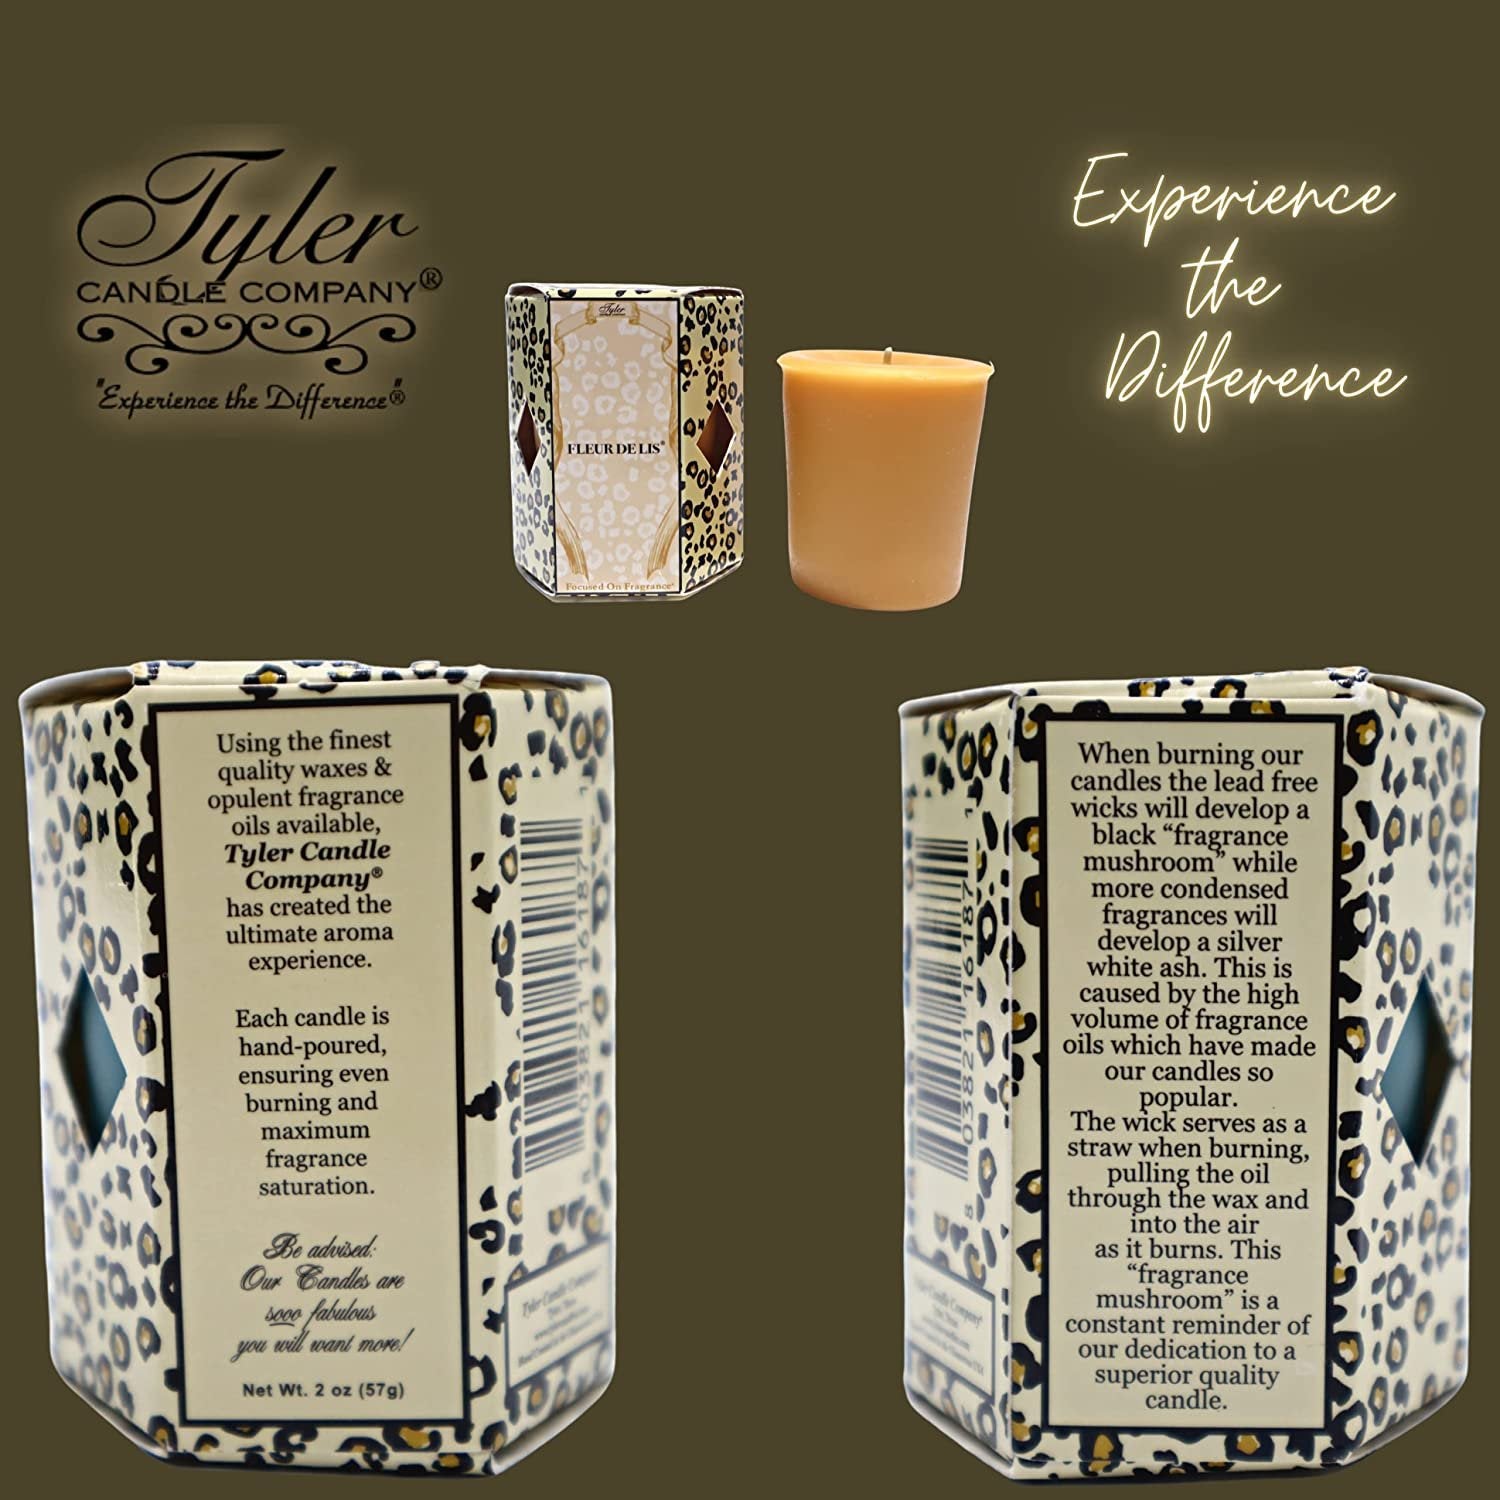 Tyler Candle Company, Fleur De Lis Superior Votive Candles, Ultimate Aromatherapy Experience, Luxury Scented Candle with Essential Oils, Case of 16 Tyler Small Candles, 2 oz and 15 Hr Burn Time Each